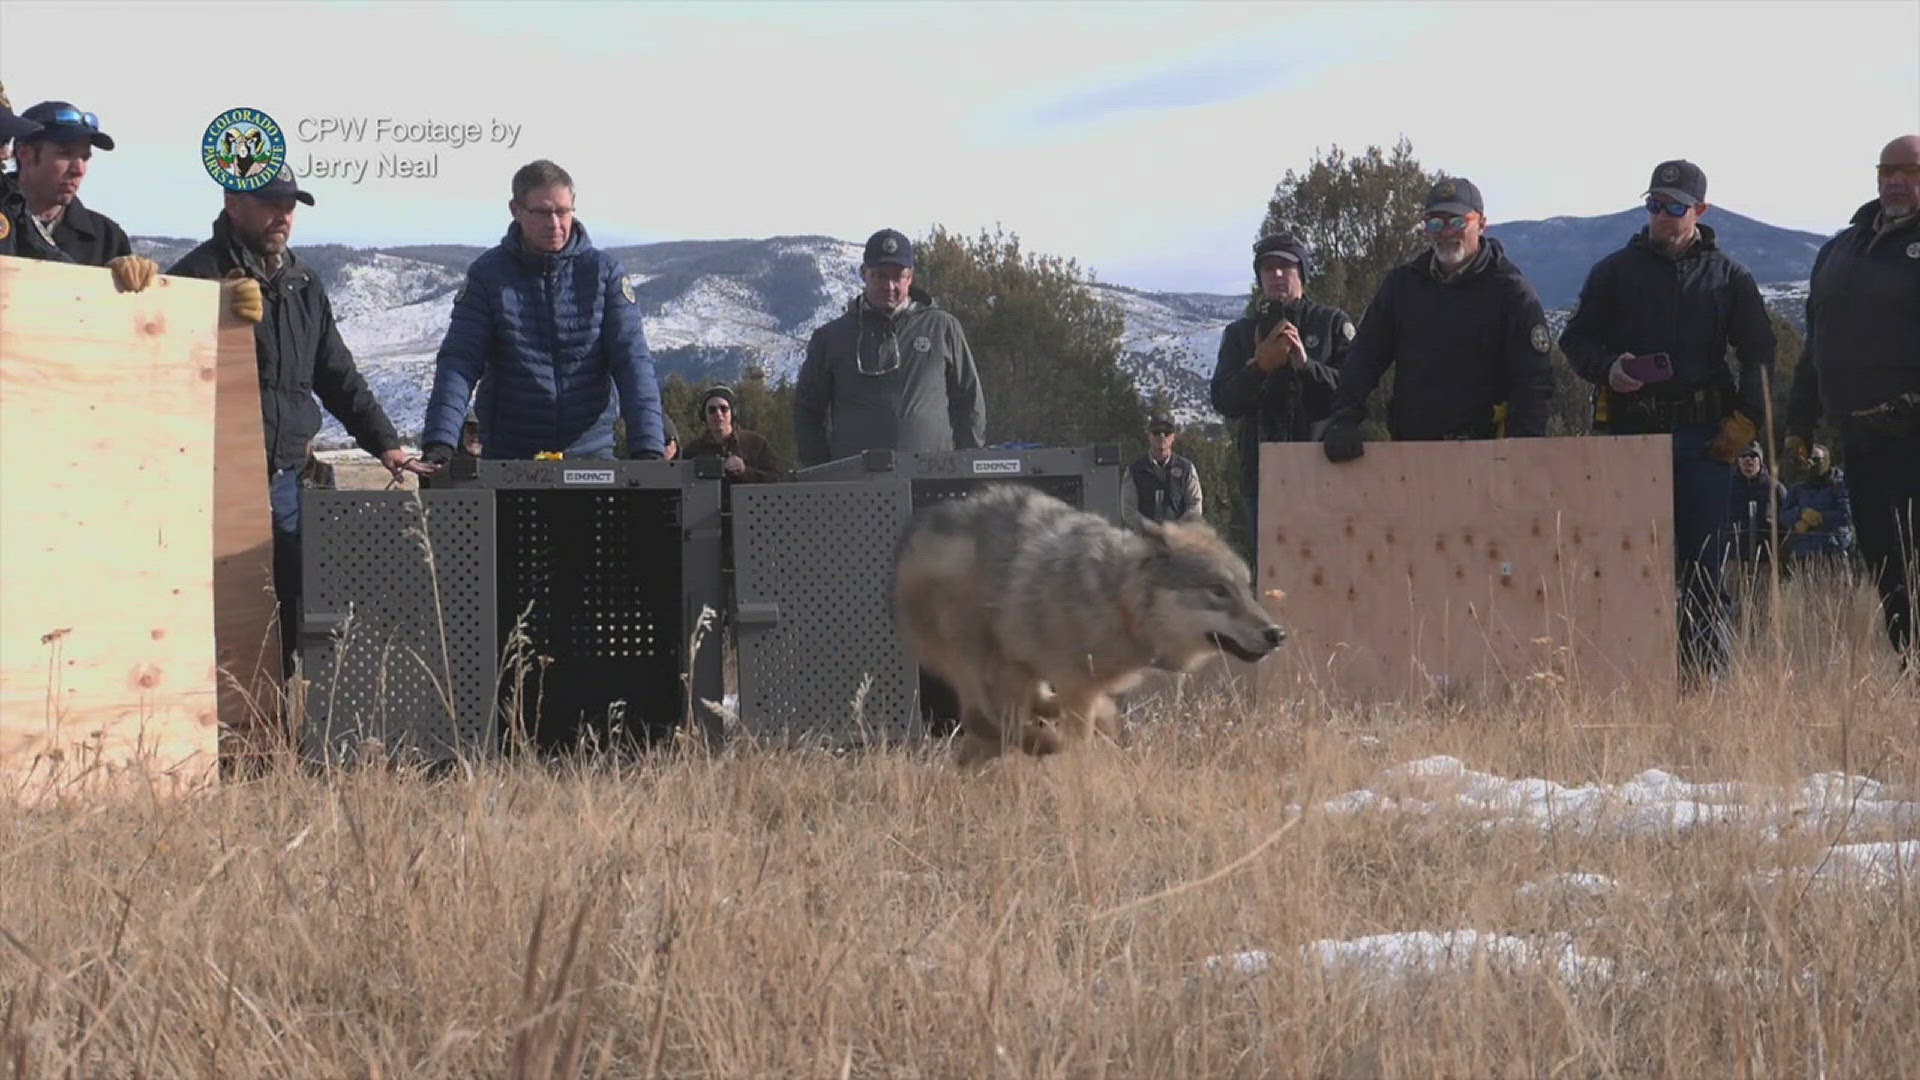 Ranchers in Colorado are struggling to find common ground after multiple livestock animals have been found dead. They're calling for wolves to be removed by force.